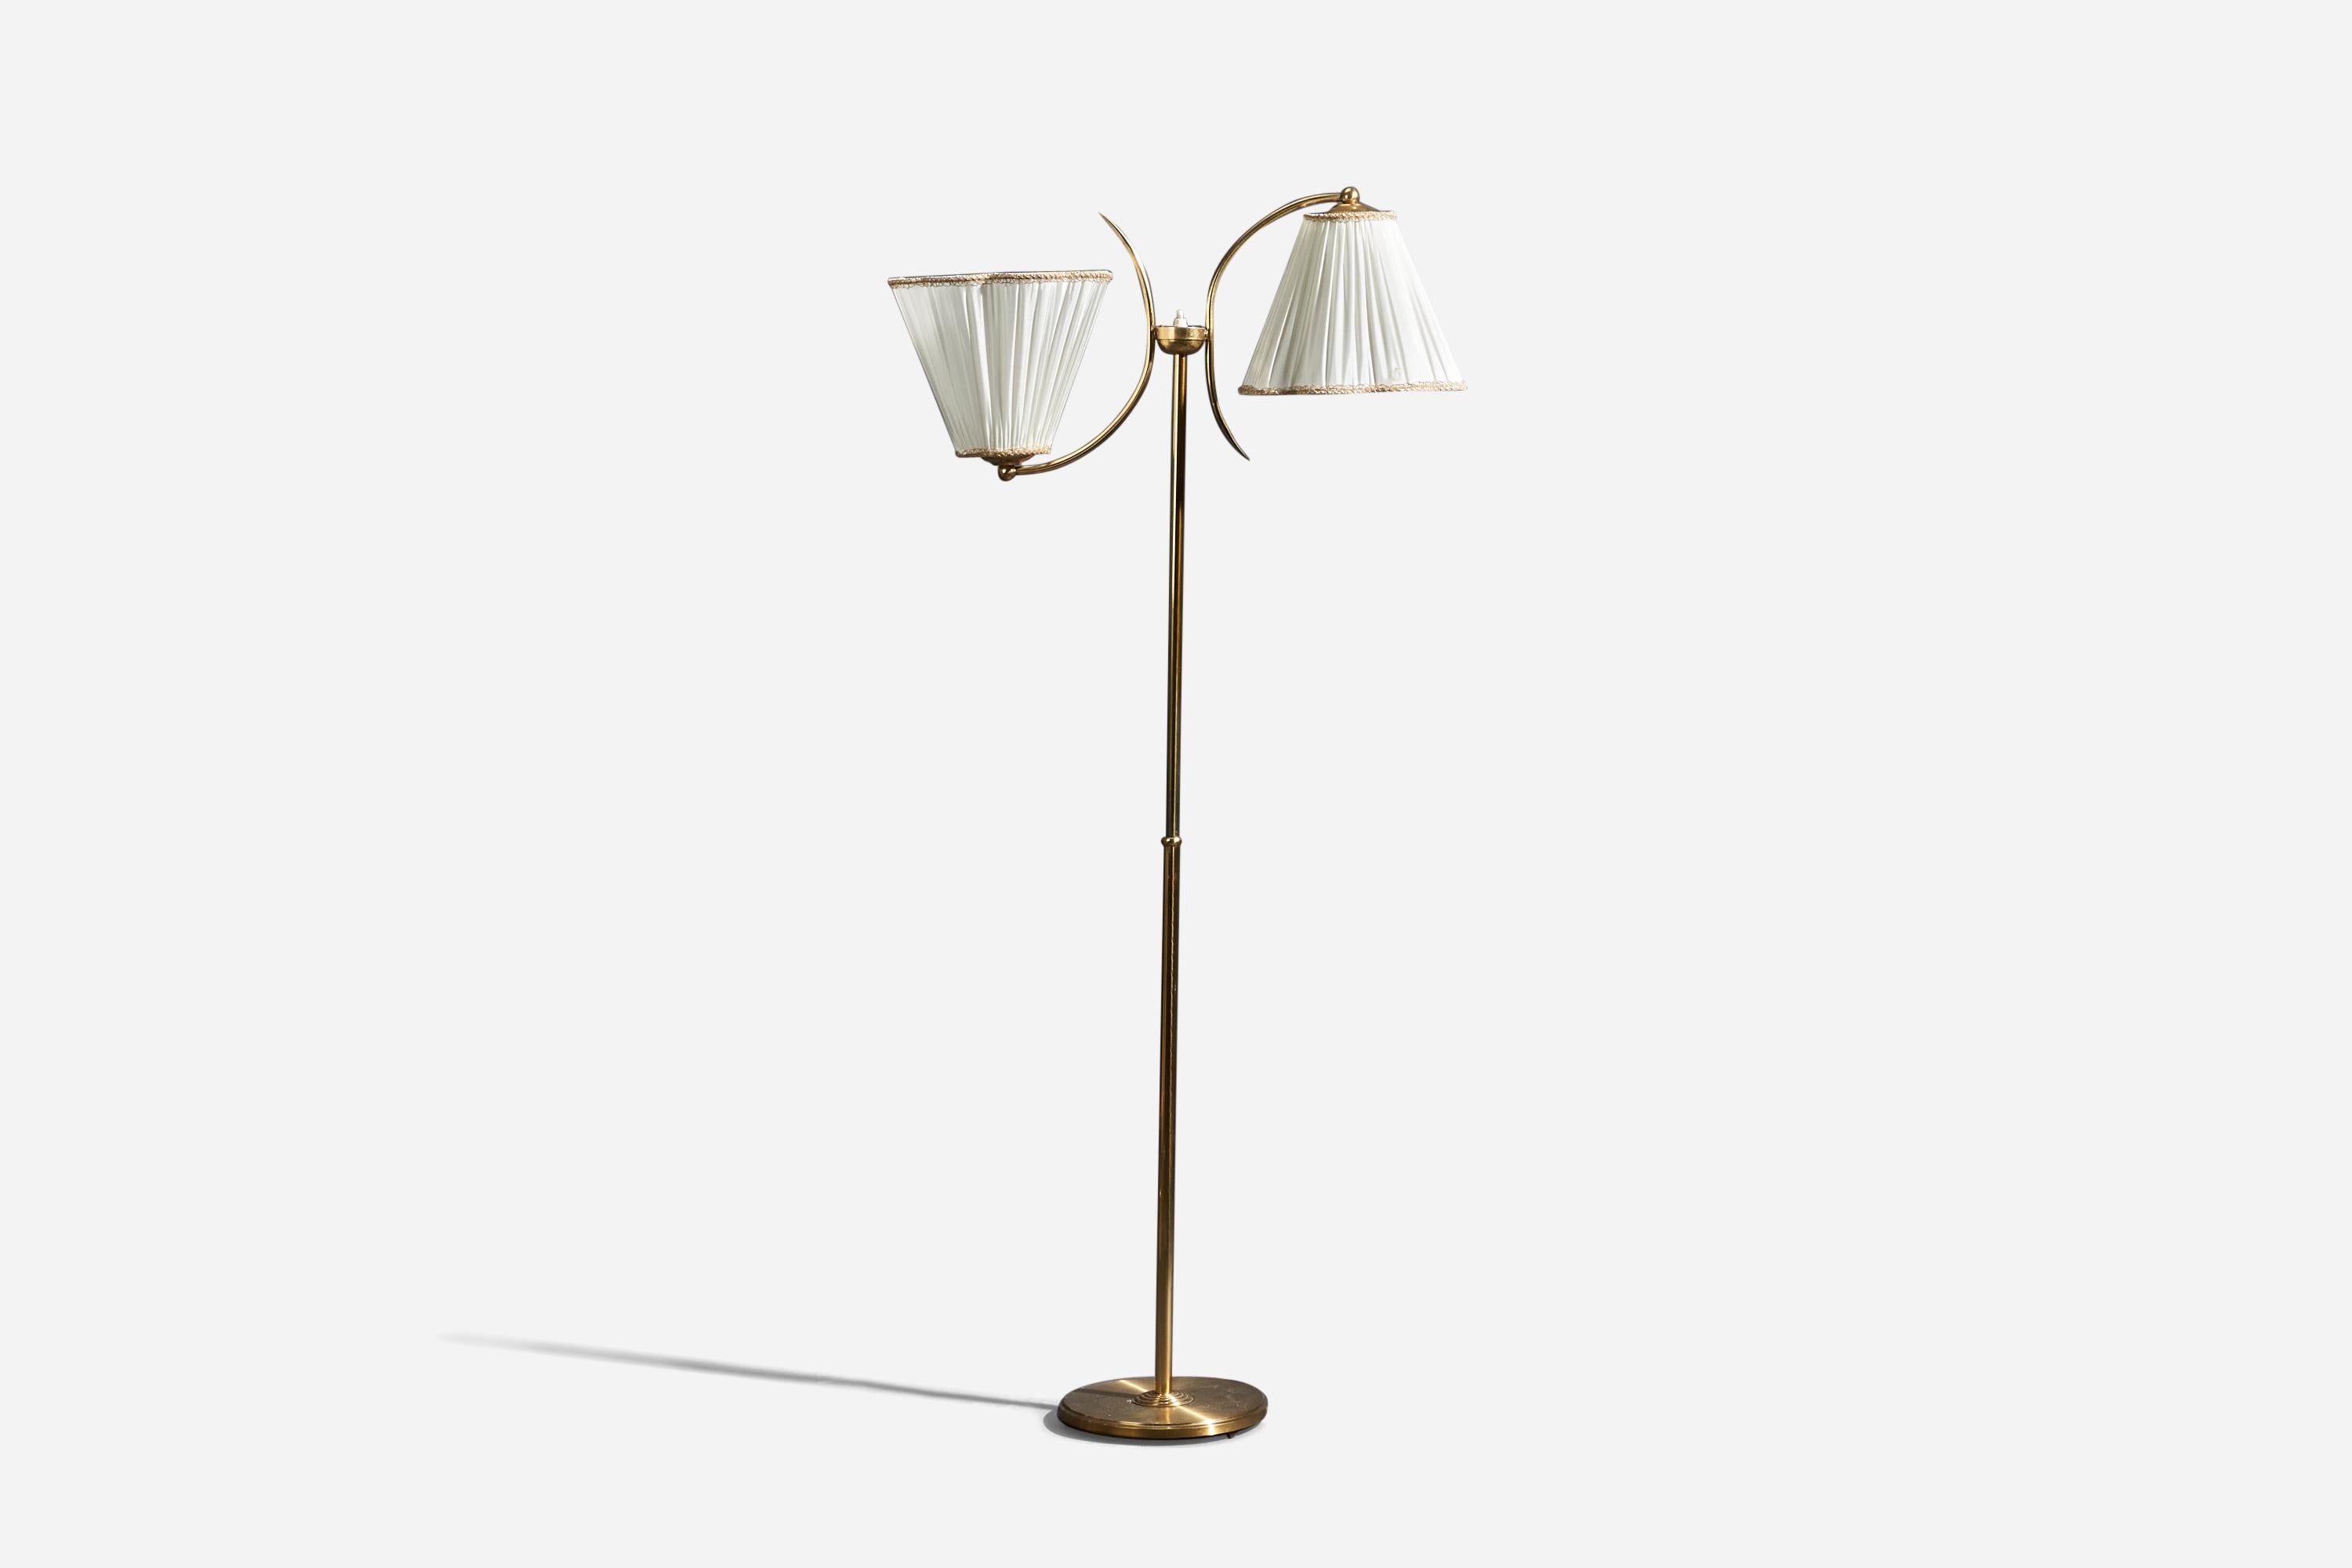 A brass and fabric floor lamp designed and produced by Ystad Metall, Sweden, 1940s.

Sold with Lampshades. Dimensions stated are of Floor Lamp with Lampshades. 

Sockets take standard E-26 medium base bulbs.

There is no maximum wattage stated